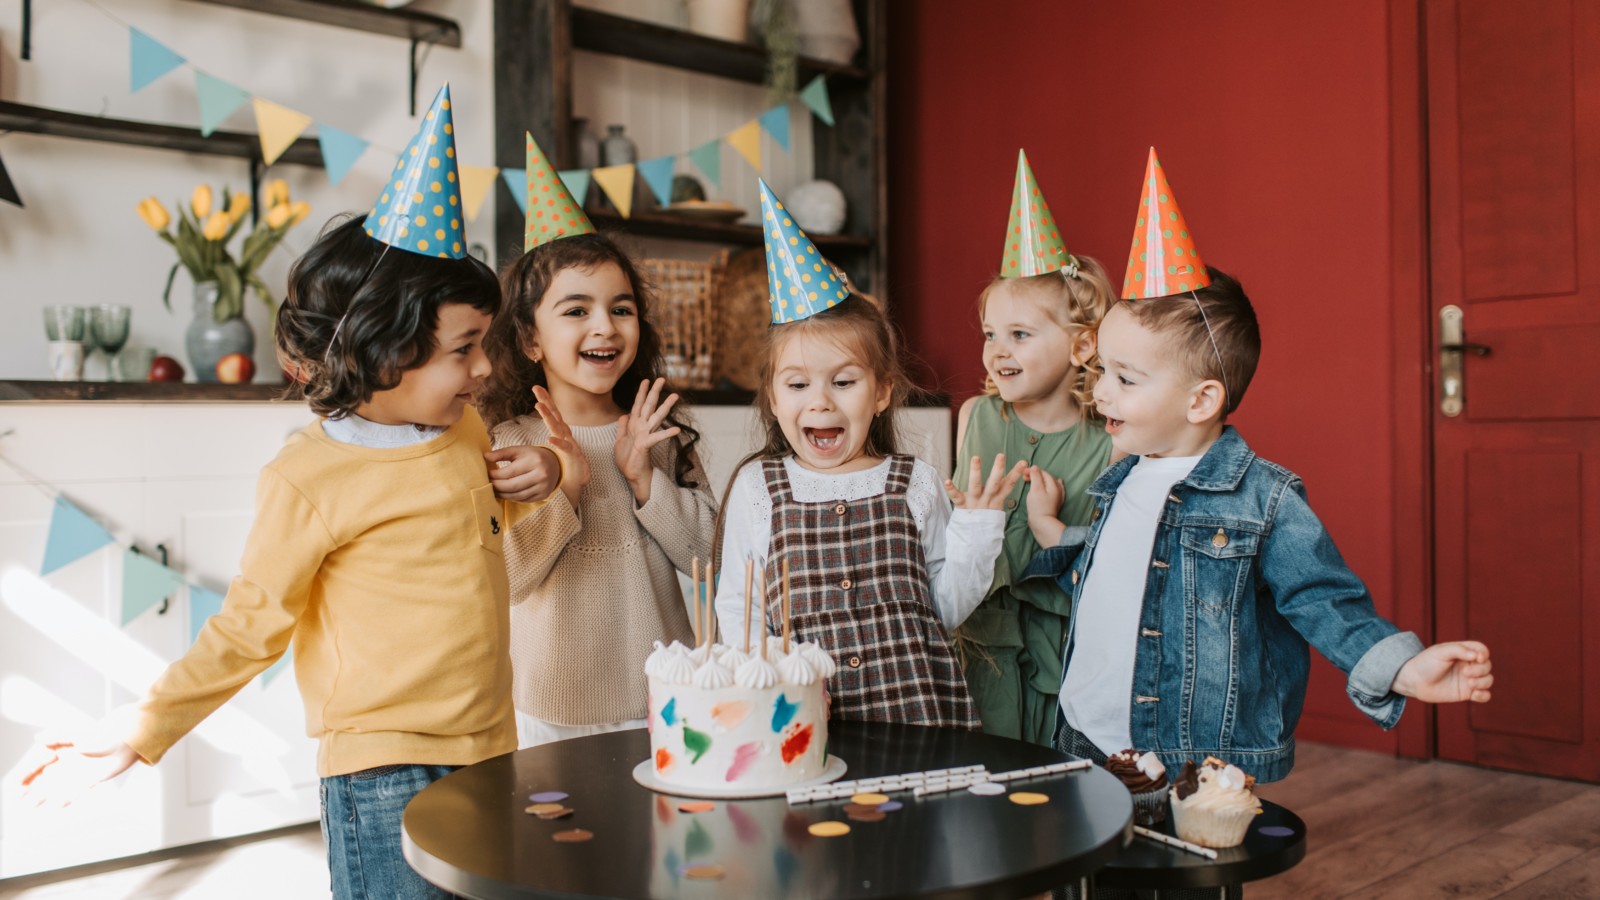 Unique Ways to Make Your Son’s Birthday Celebration Super Special